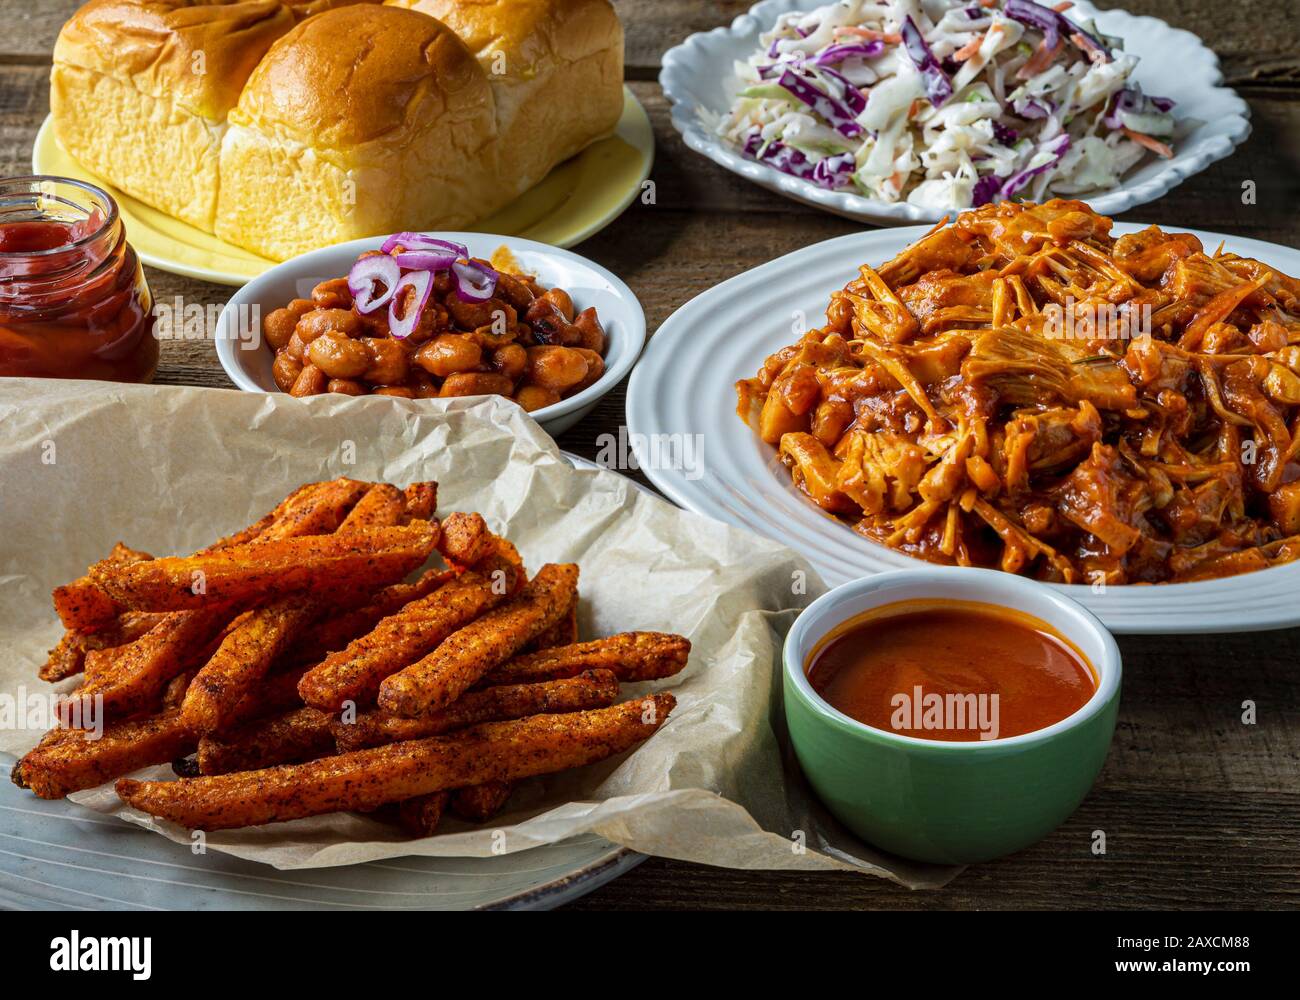 Vegan BBQ plate. Jack-fruit barbecued, Southern style baked beans, coleslaw, dinner rolls and sweet potato fries. Stock Photo